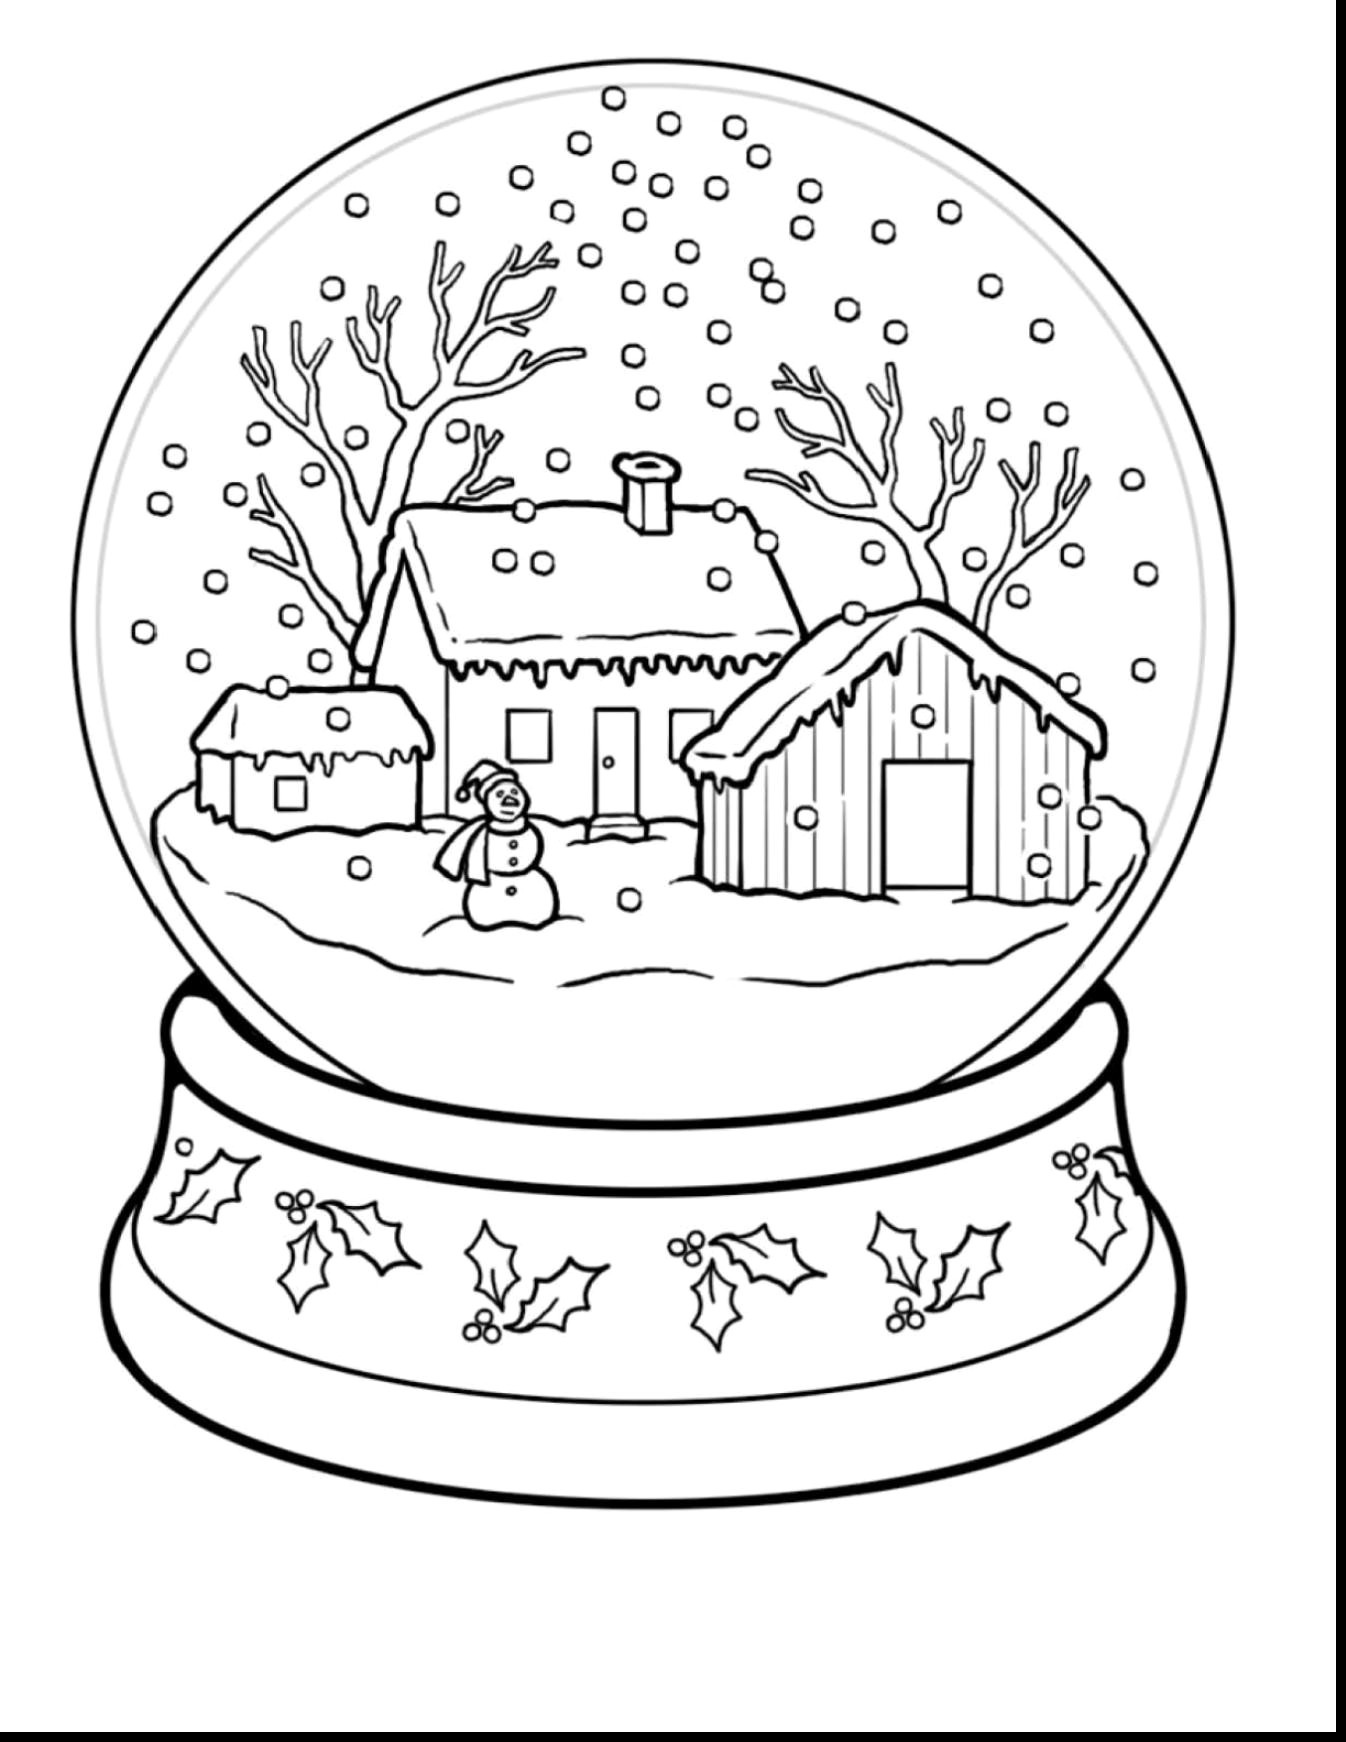 Free Printable Winter Coloring Pages Page Of Scene - Telematik - Free Printable Winter Coloring Pages